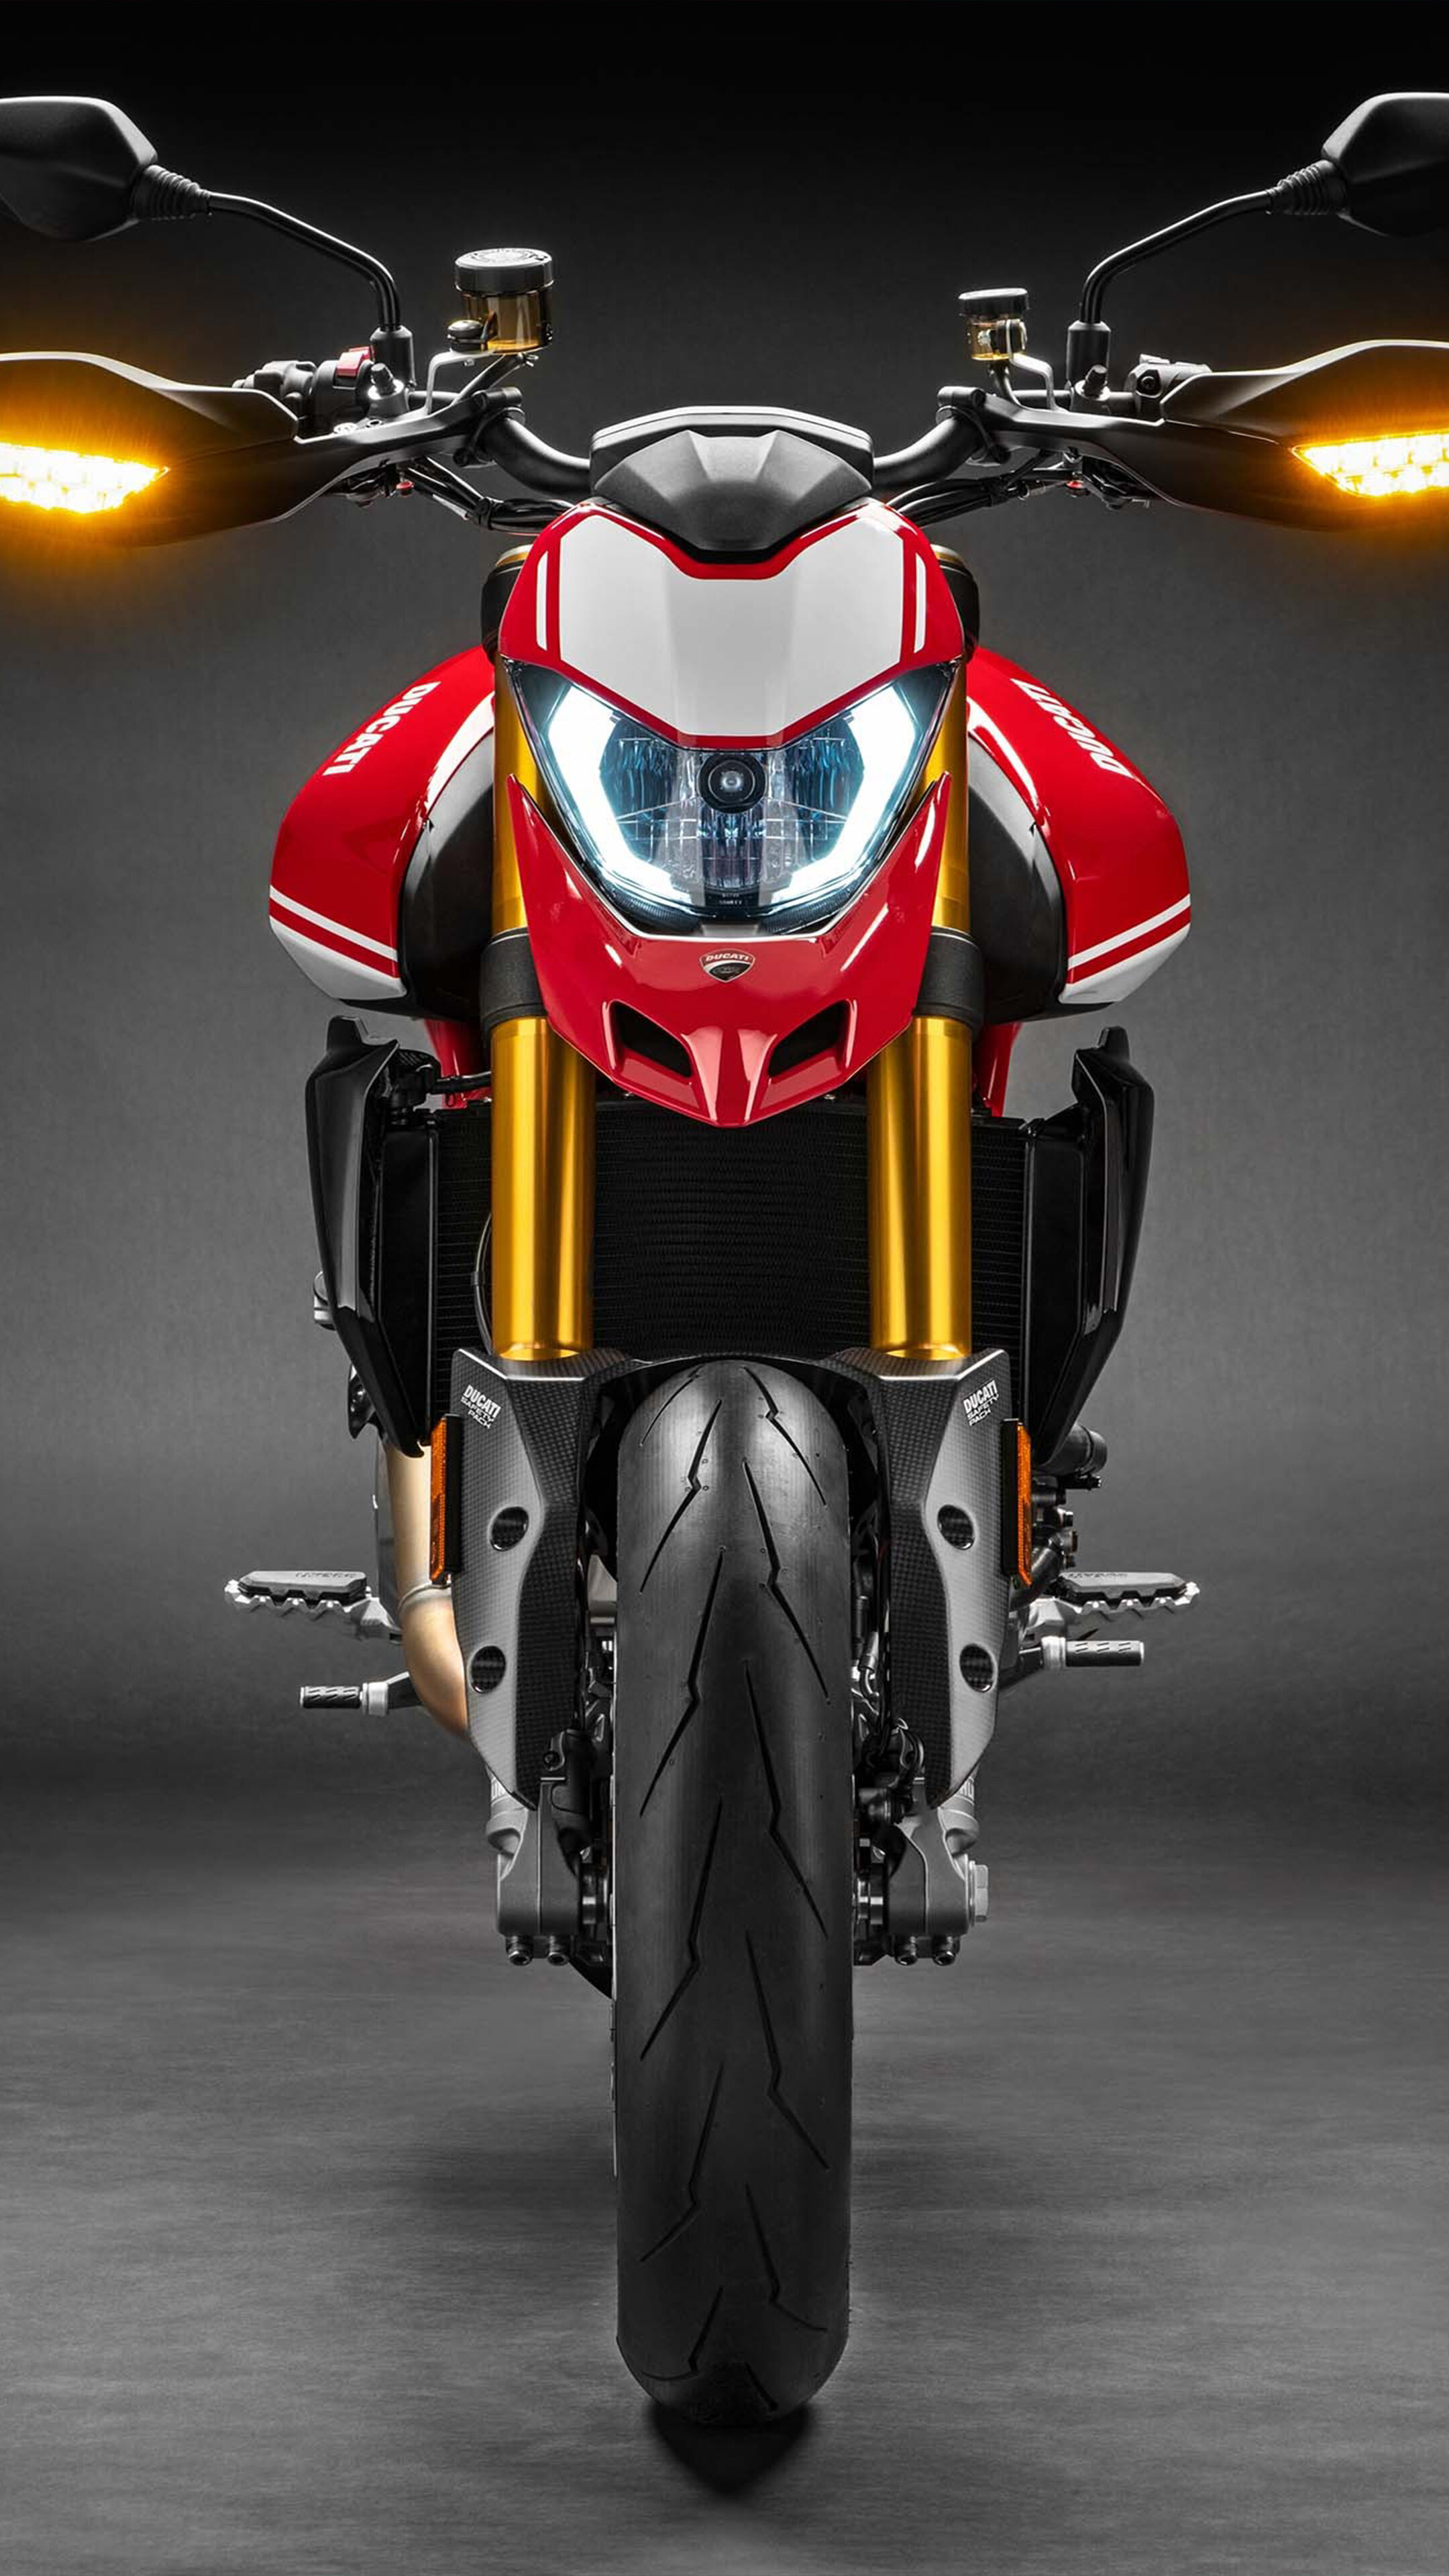 Ducati: Hypermotard 950 SP, A supermotard motorcycle designed by Pierre Terblanche. 2160x3840 4K Wallpaper.